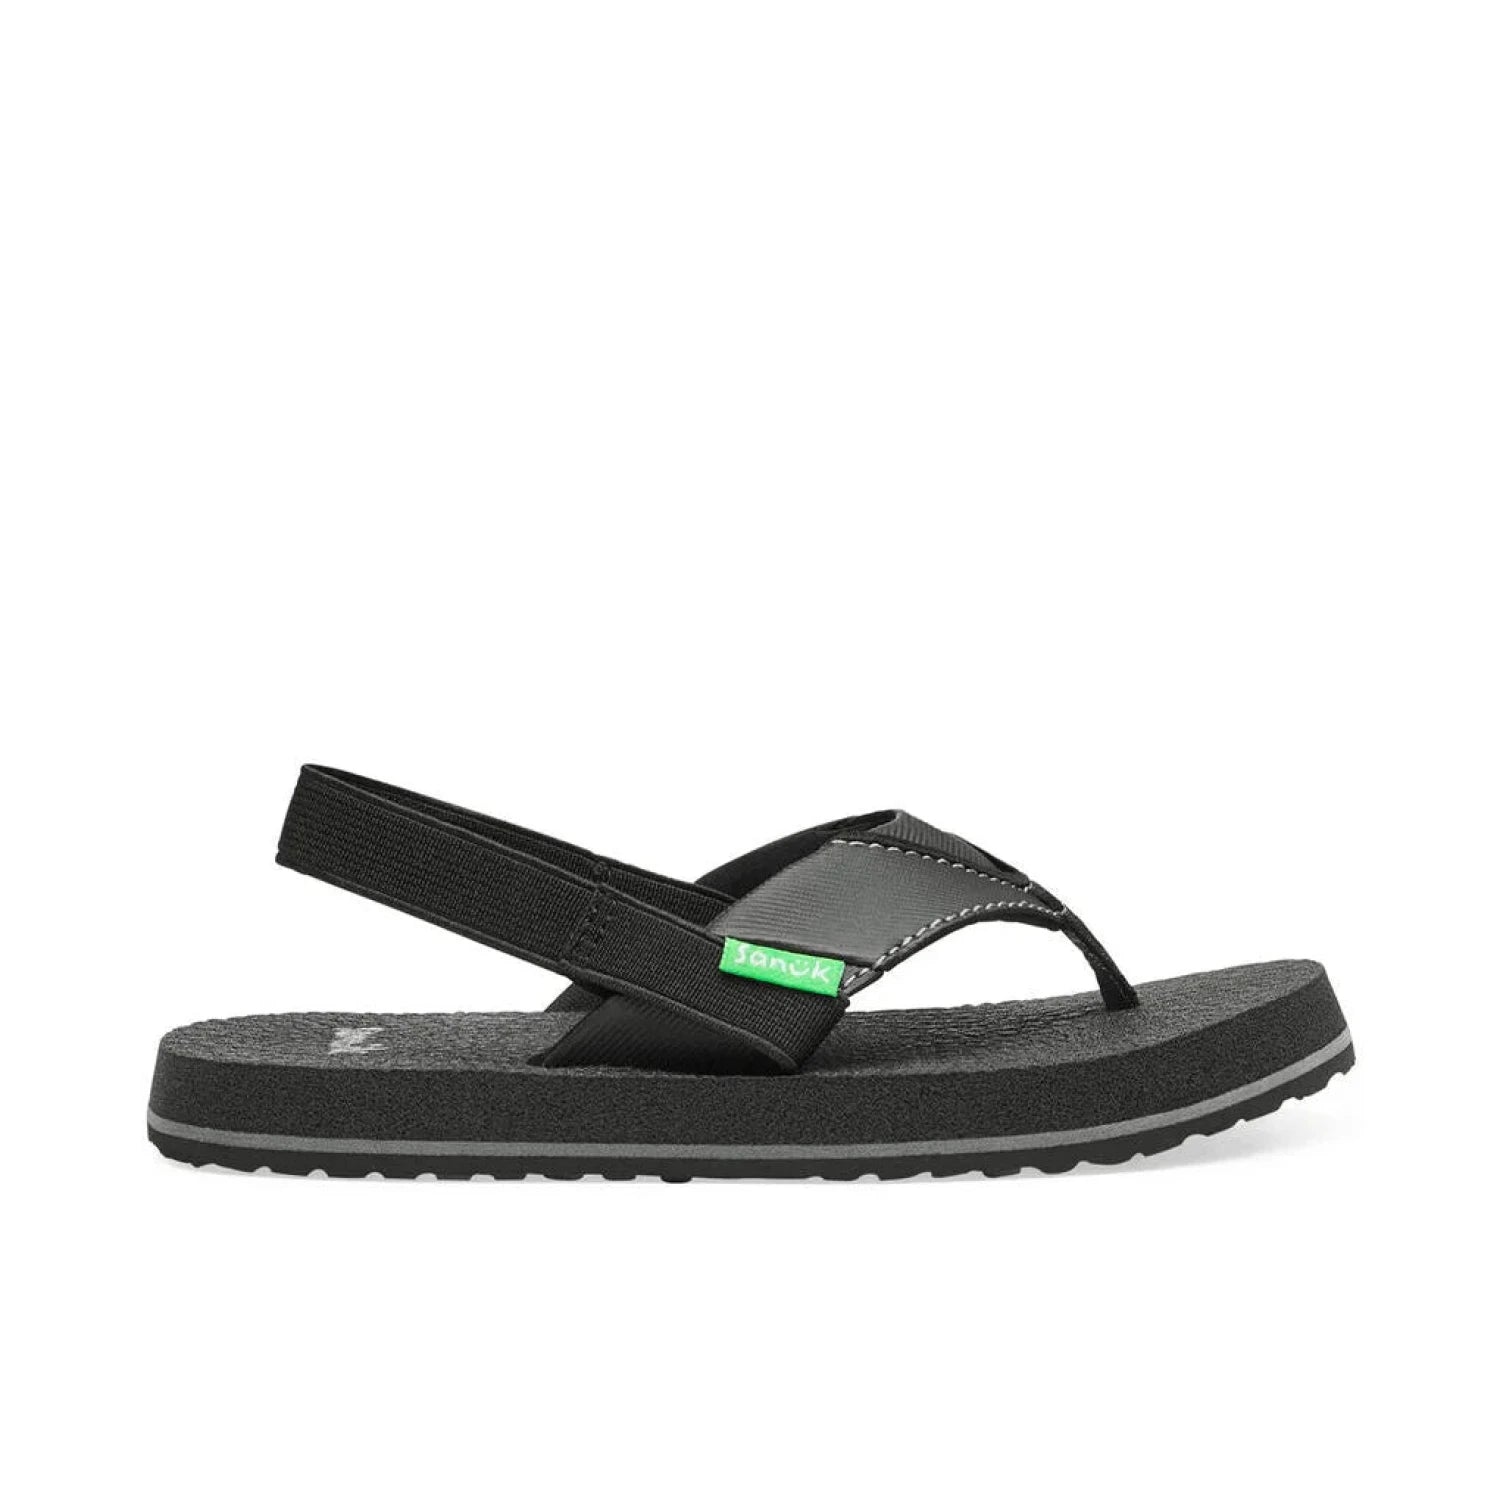 Sanuk Root Beer Cozy Little Kids Sandal shown in the Black color option. Outside view.